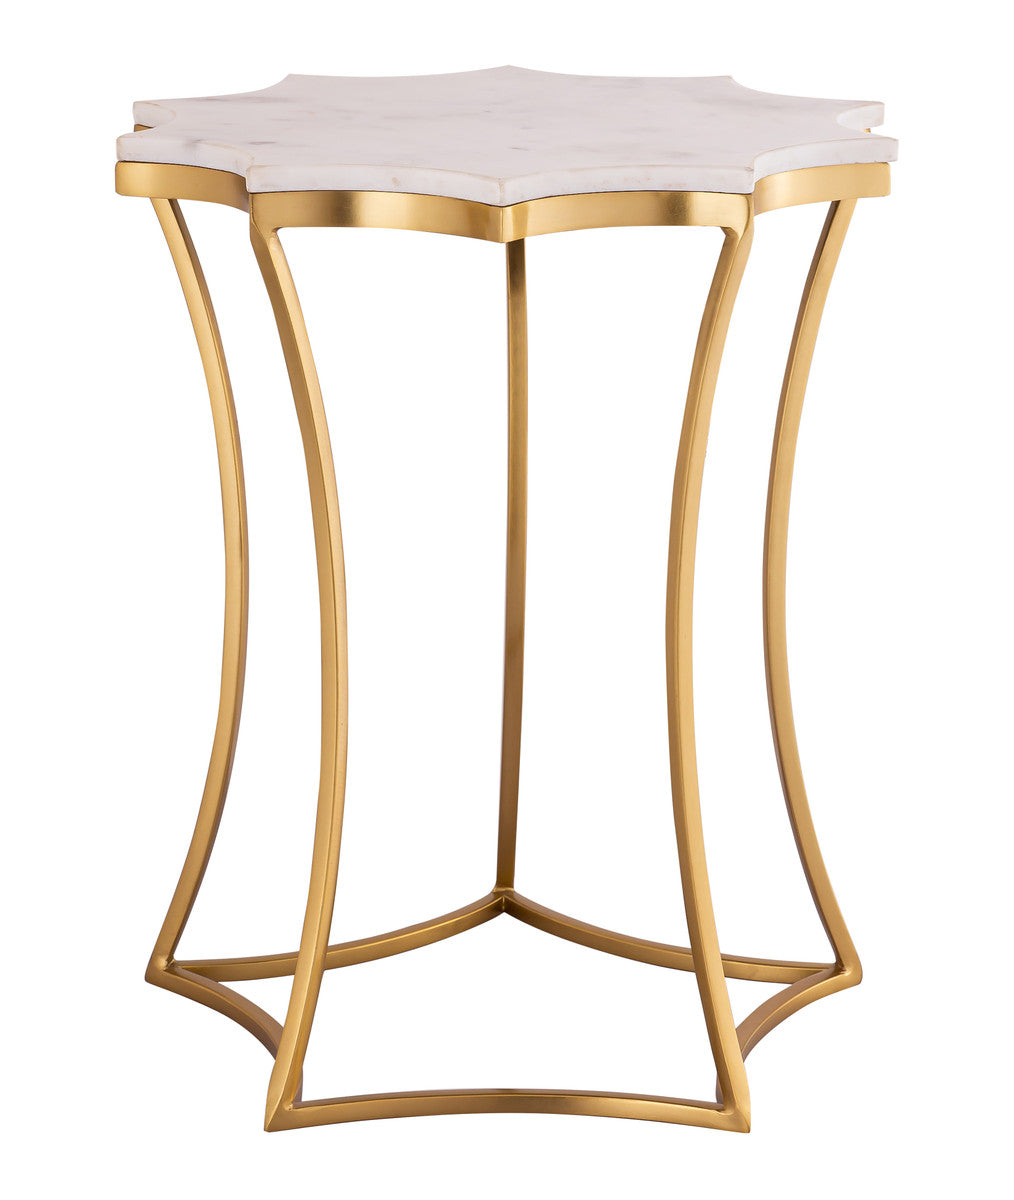 Camilla Marble Side Table By Inspire Me! Home Decor